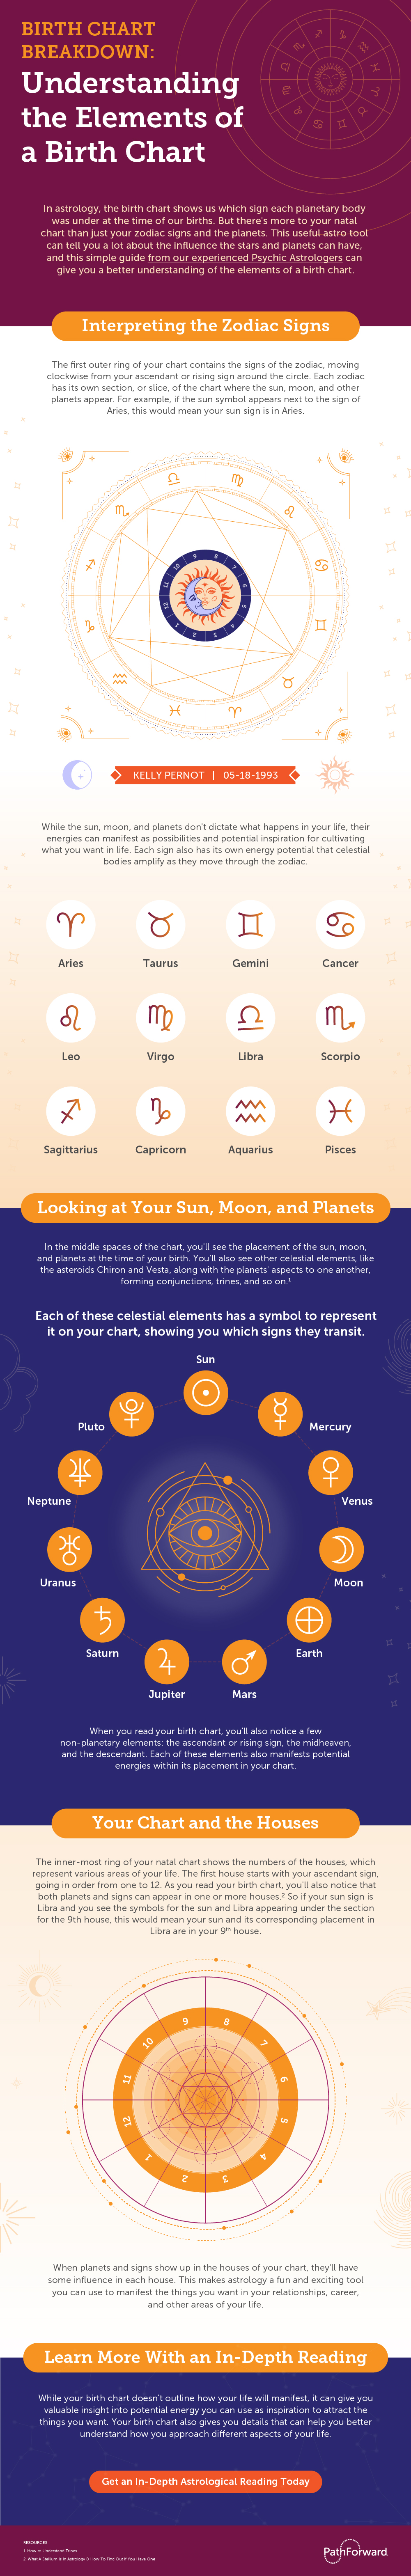 Your Birth Chart is like a roadmap for your spirit. Learn the basic to understanding and interpreting your birth chart with this easy guide.